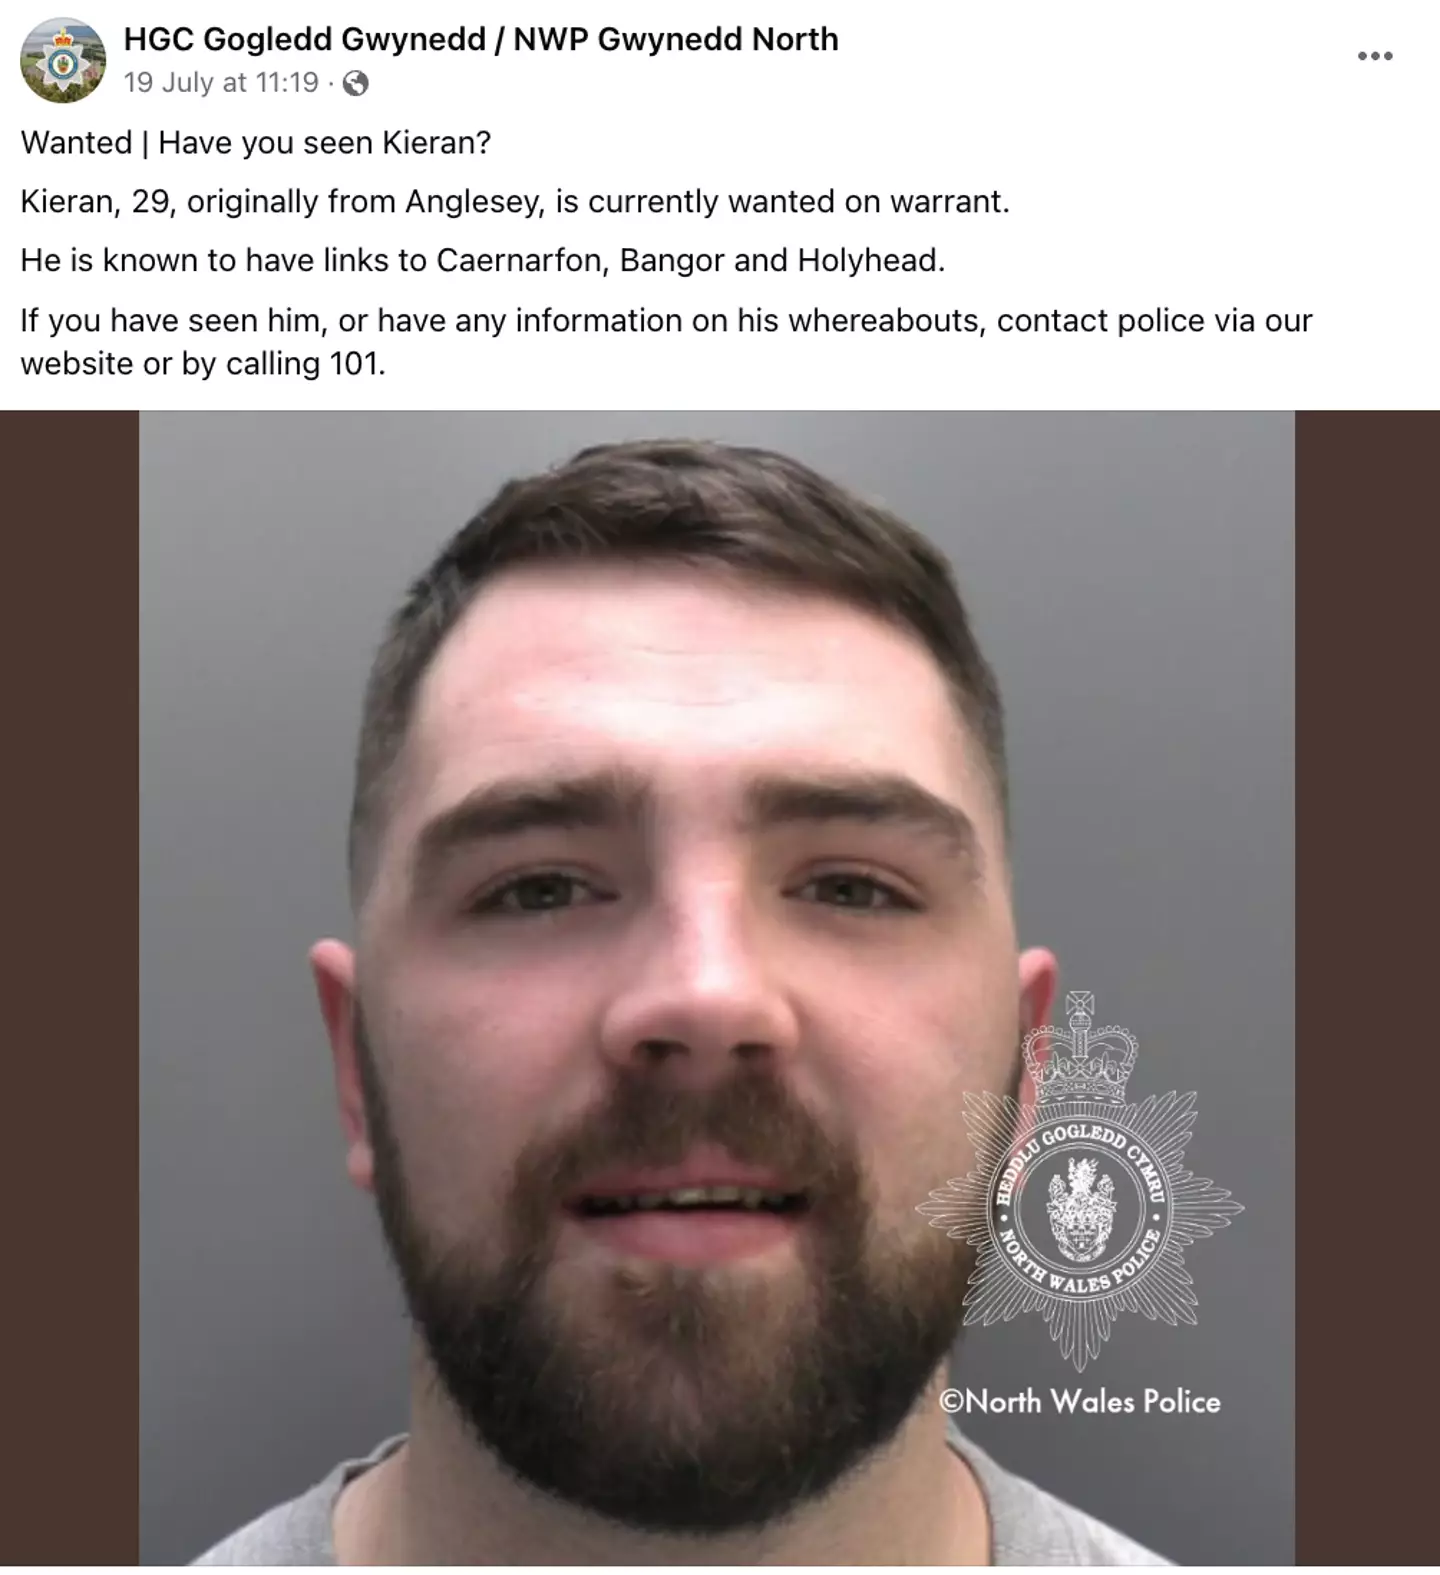 Police in North Wales launched an appeal.